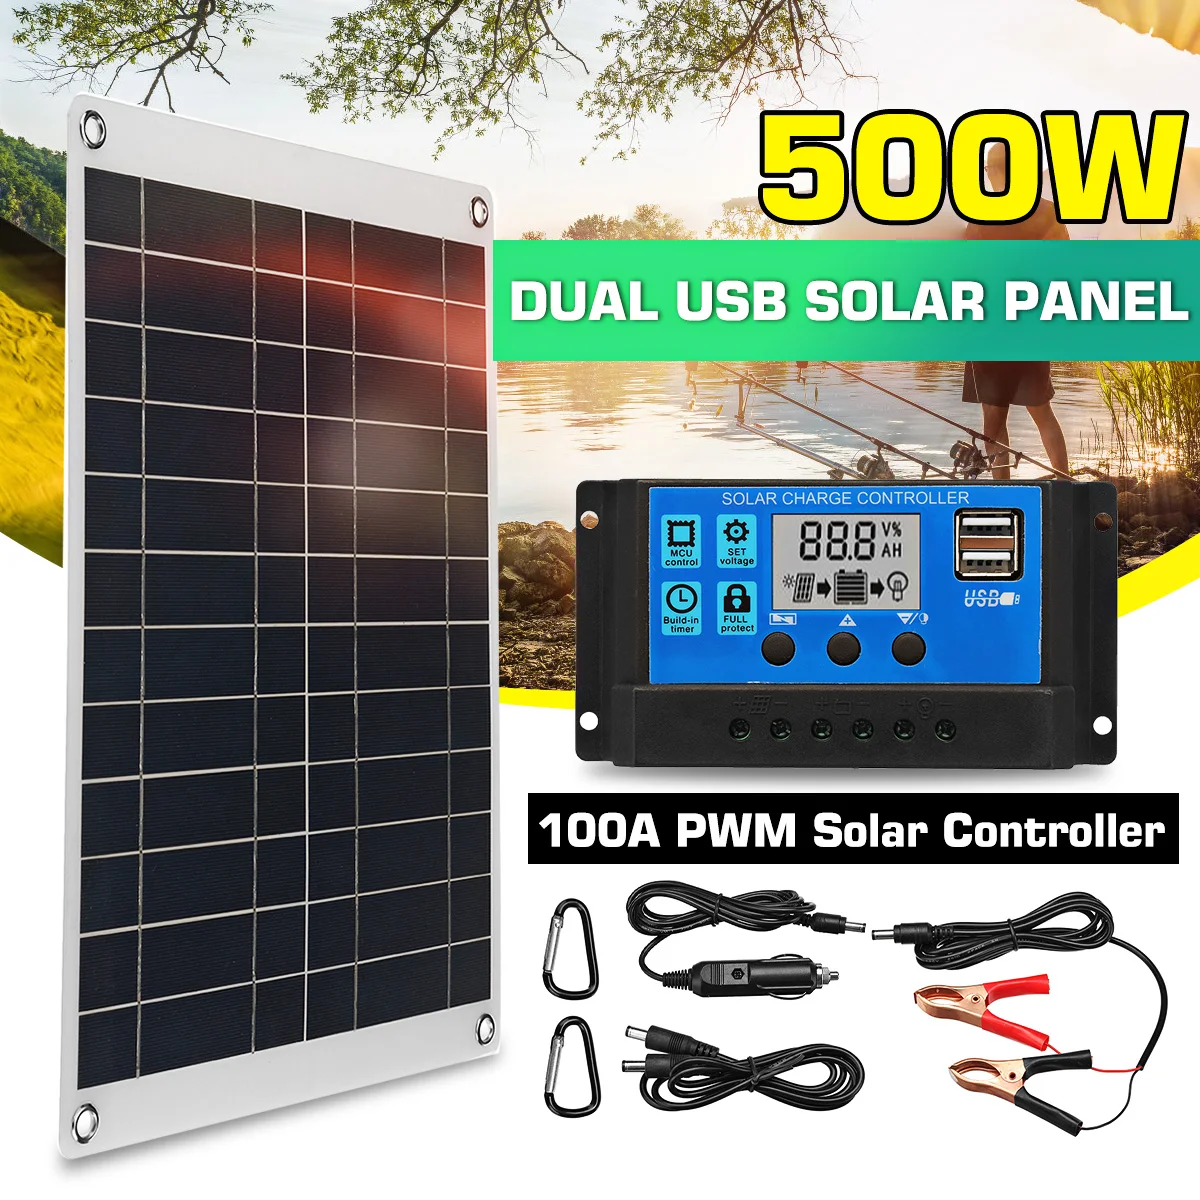 

500W Solar Panel Kit Complete Fixed Dual 12/5V DC USB With 100A PWM Solar Controller Solar Cell for Car Yacht RV Battery Charger